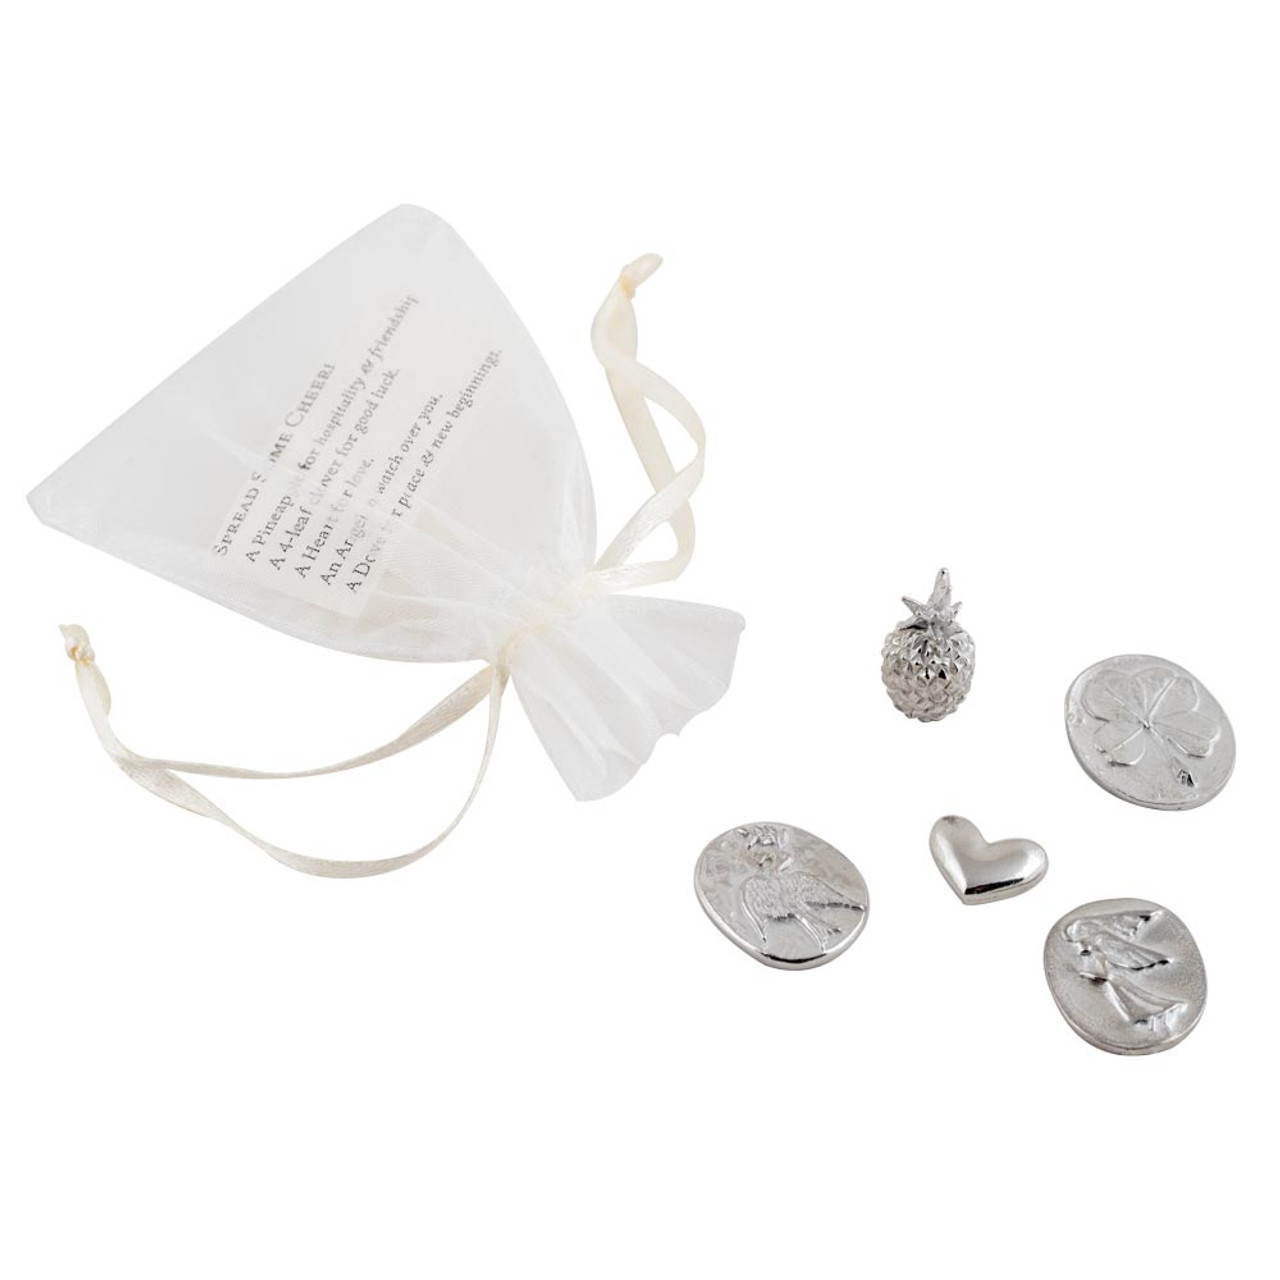 Bag of Cheer Pocket Charms - Vilmain Collection - Danforth Pewter - Made in  USA